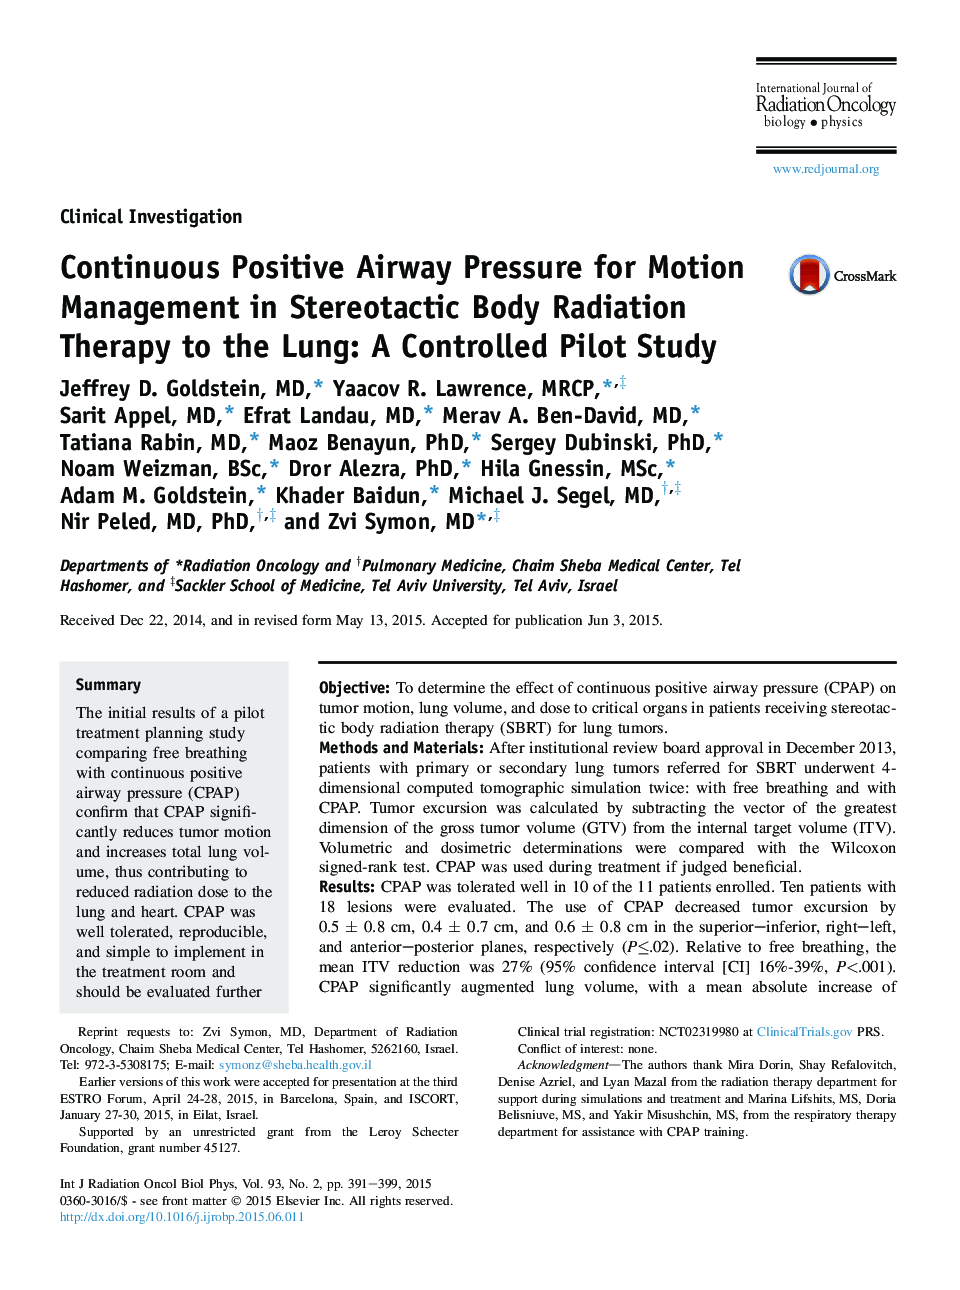 Continuous Positive Airway Pressure for Motion Management in Stereotactic Body Radiation Therapy to the Lung: A Controlled Pilot Study